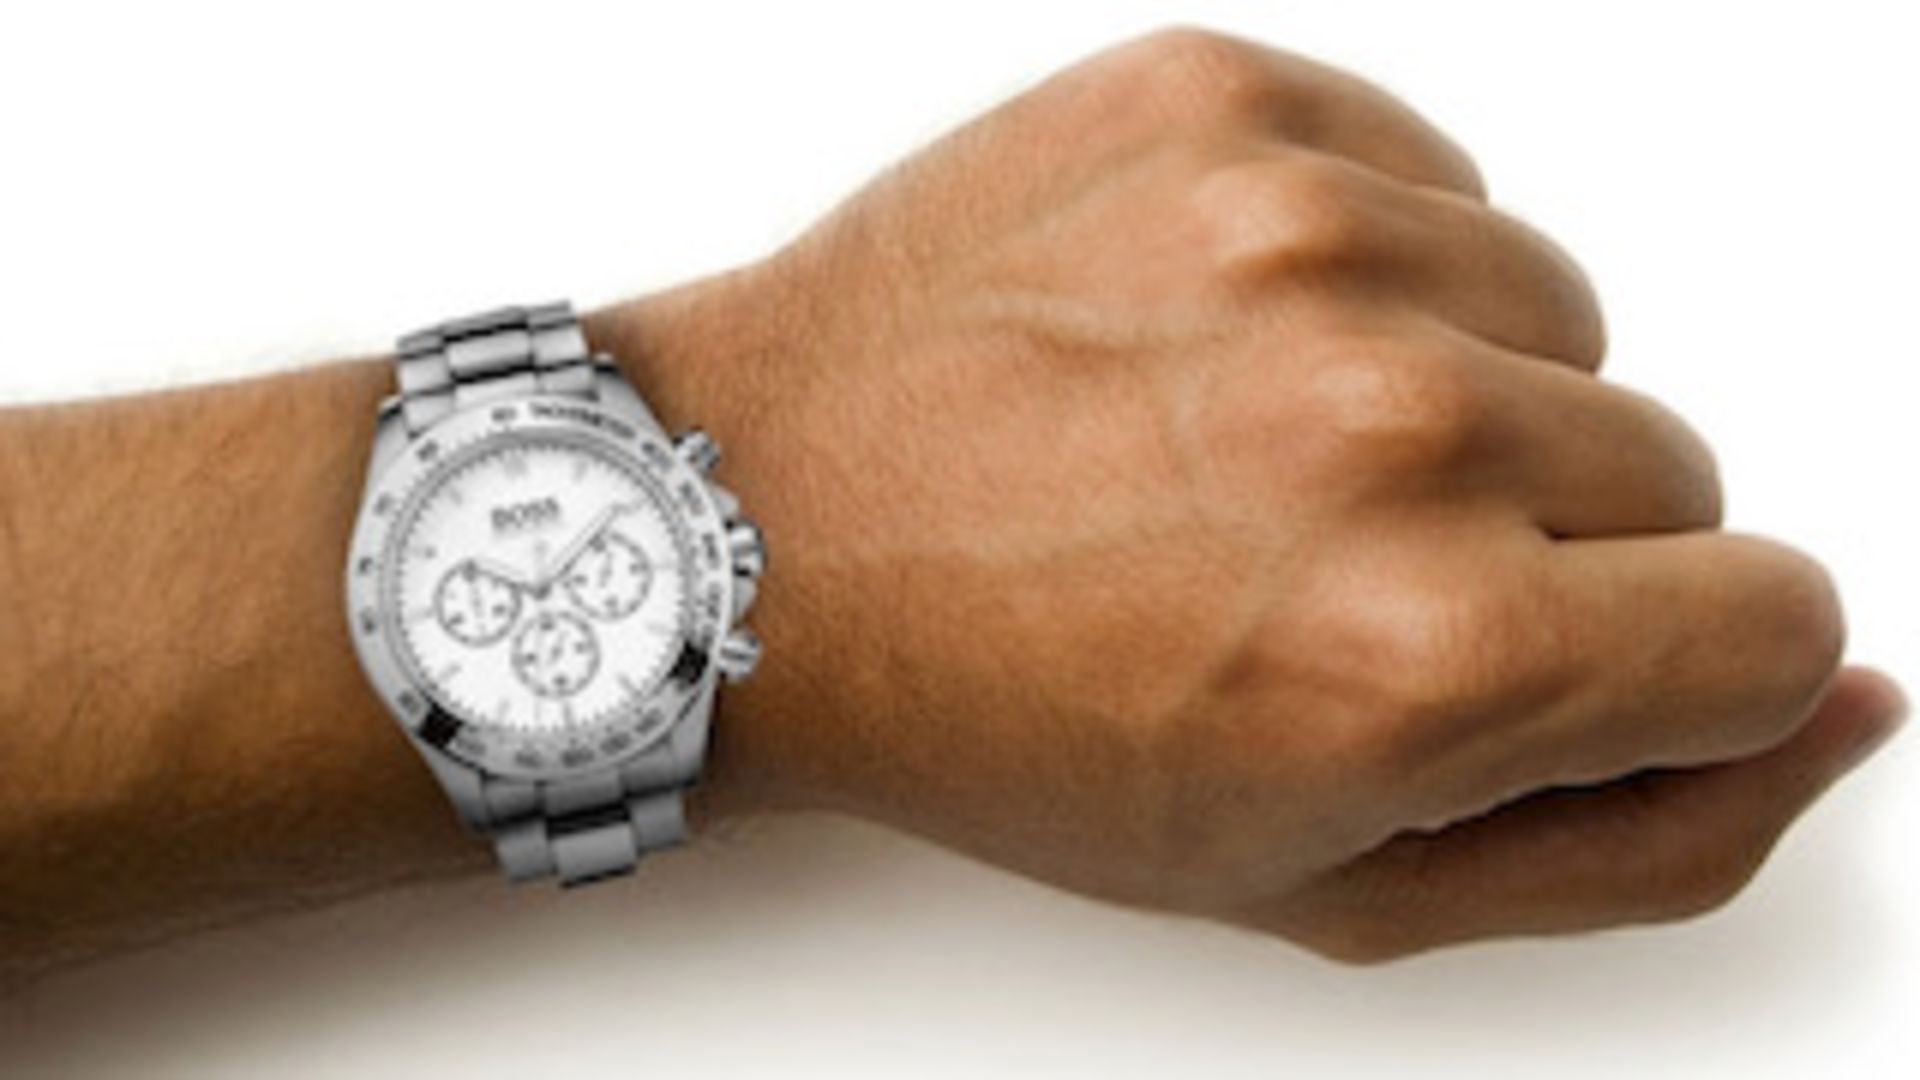 Hugo Boss Men's Ikon Silver Bracelet Chronograph Watch 1512962 Rugged And Purposeful Whilst - Image 2 of 4